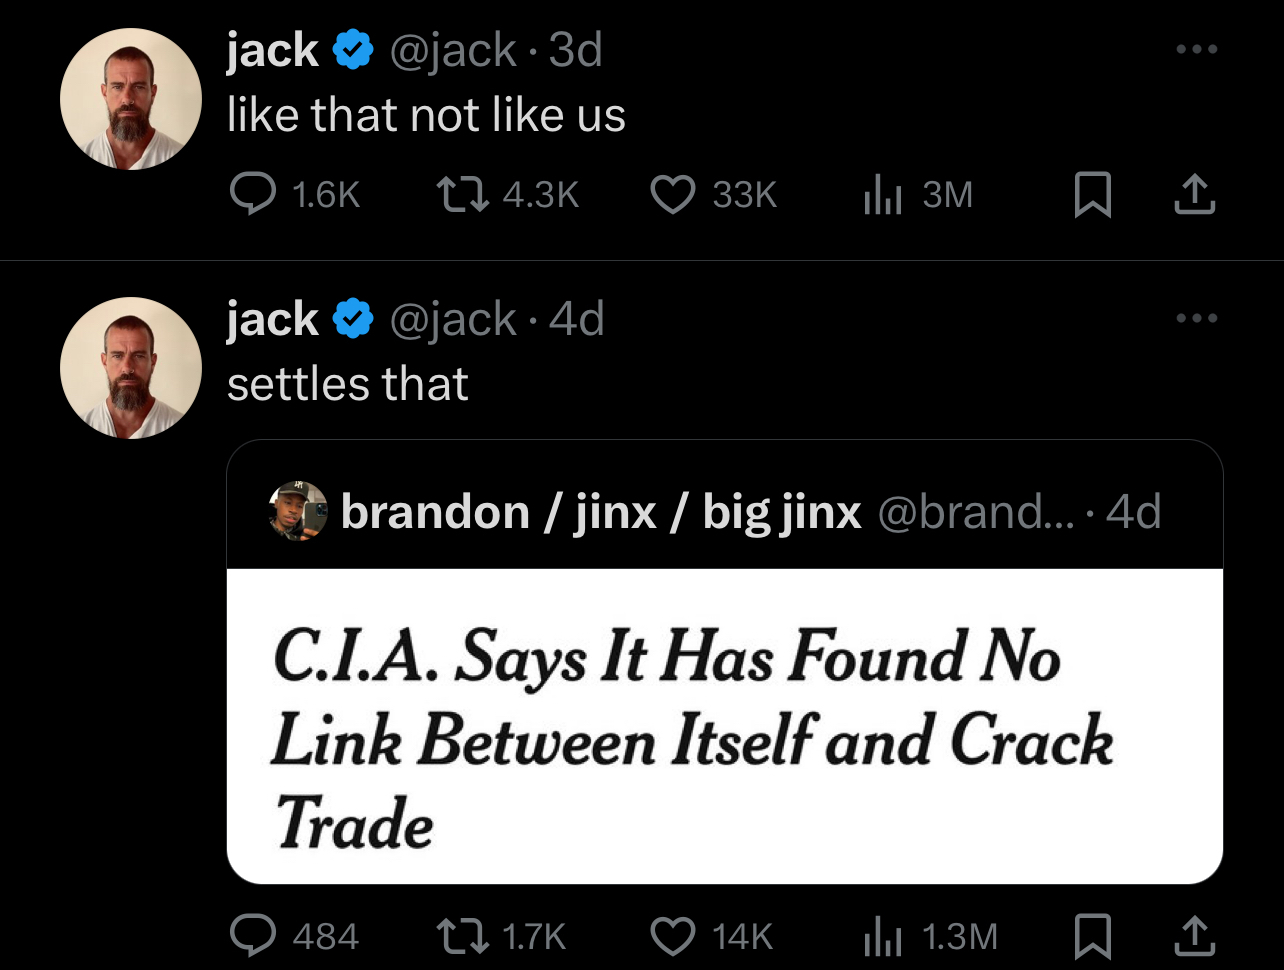 Screenshot of Twitter posts by users &#x27;jack&#x27; and &#x27;brandon / jinx / big jinx&#x27; discussing a C.I.A. statement denying a link to the crack trade